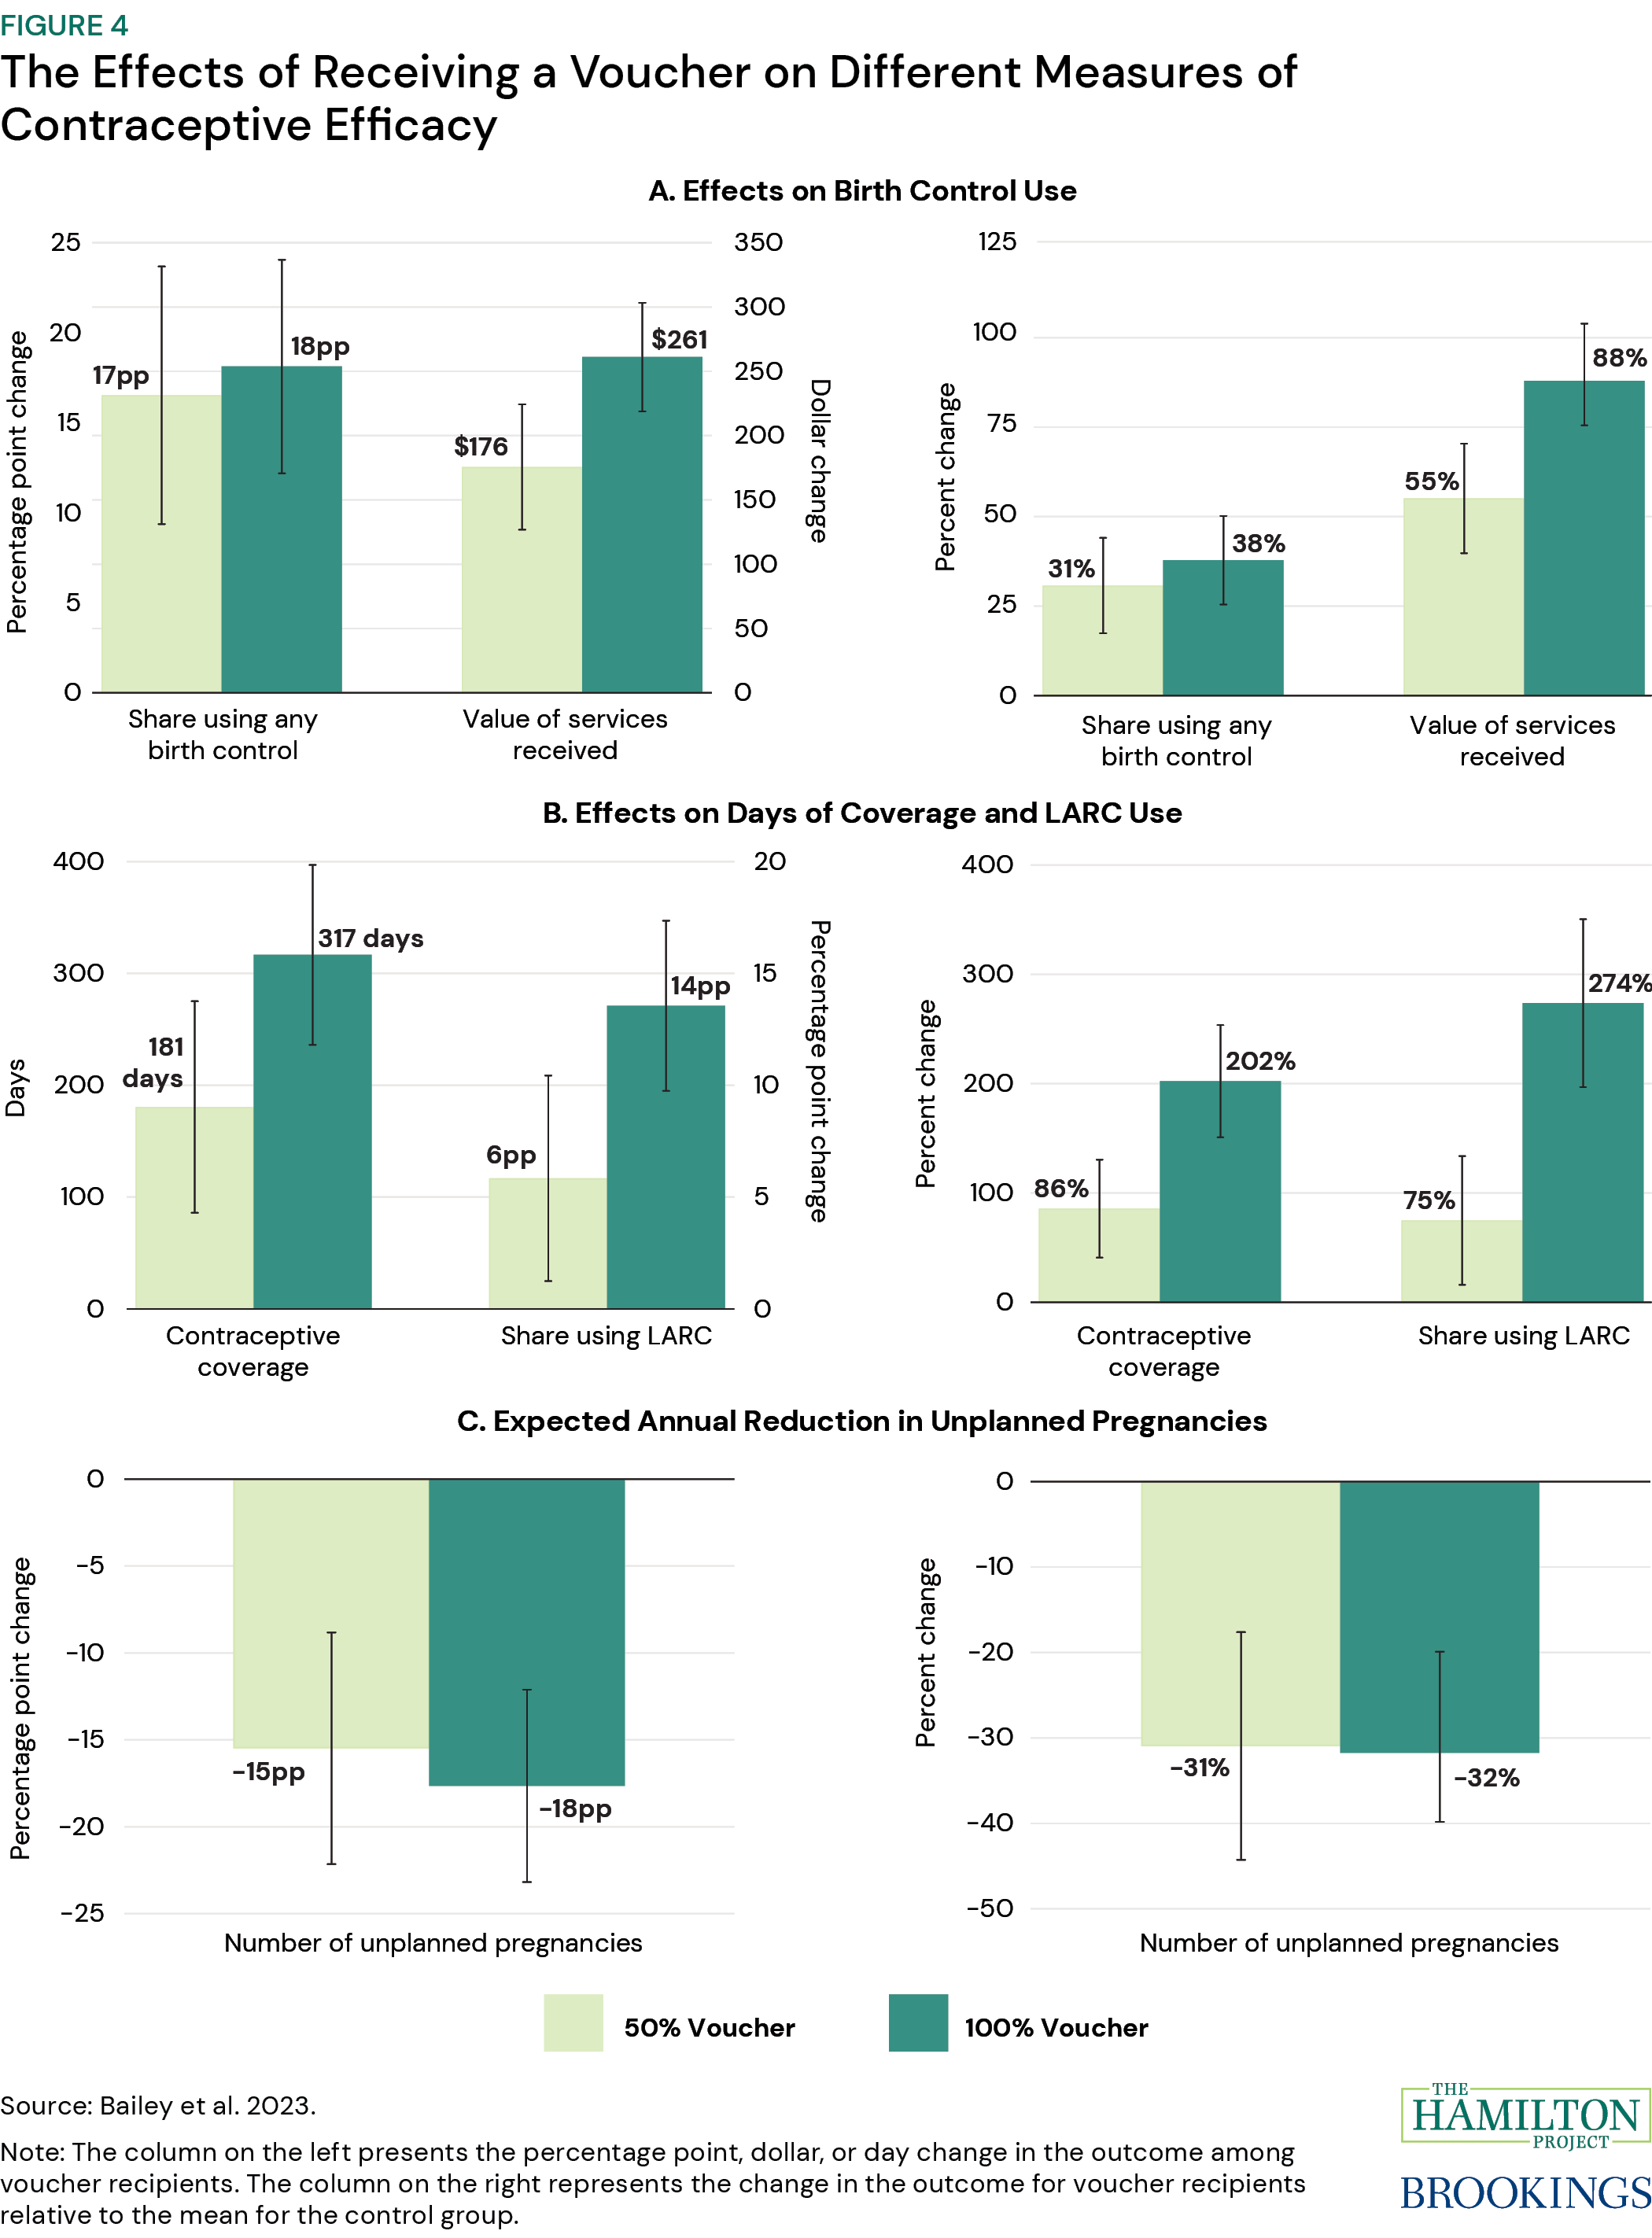 Figure illustrating the effects of receiving a voucher on different measures of contraceptive efficacy